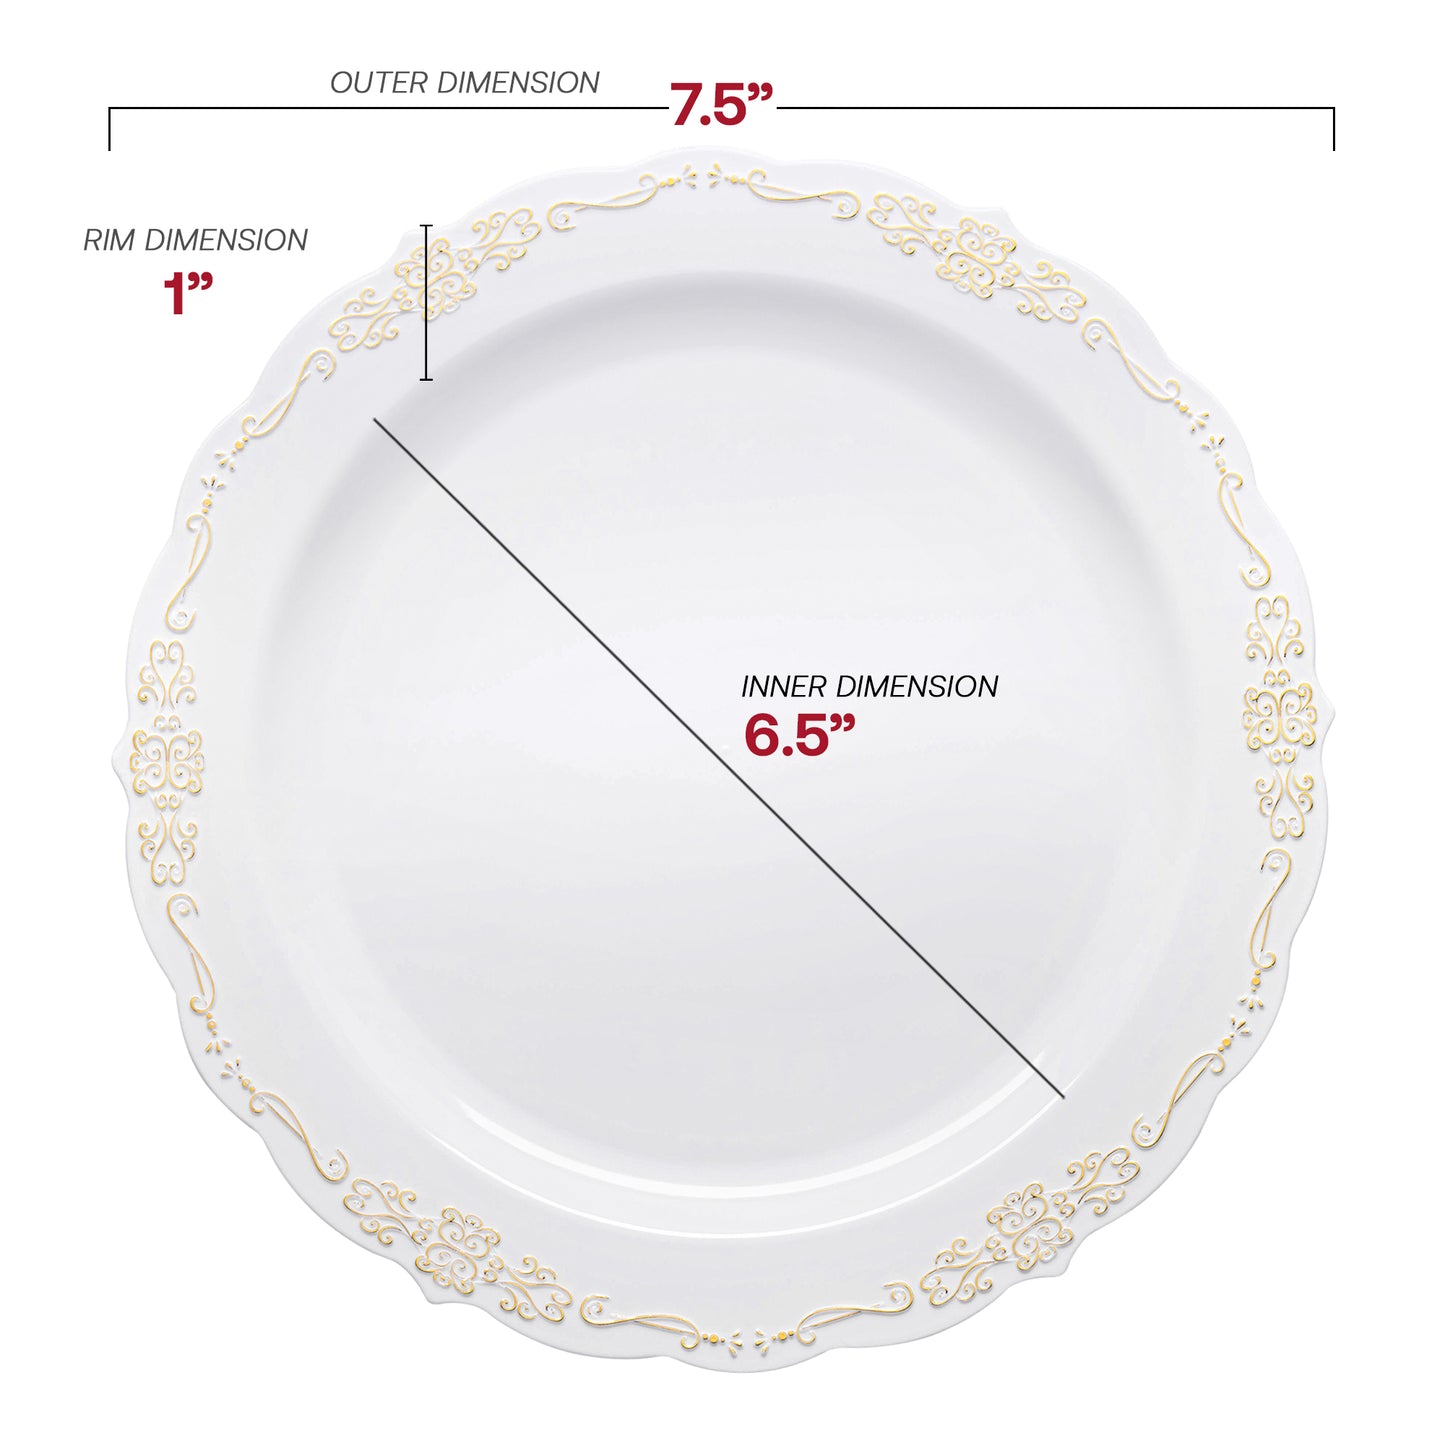 White with Gold Vintage Rim Round Disposable Plastic Appetizer/Salad Plates (7.5") Dimension | The Kaya Collection